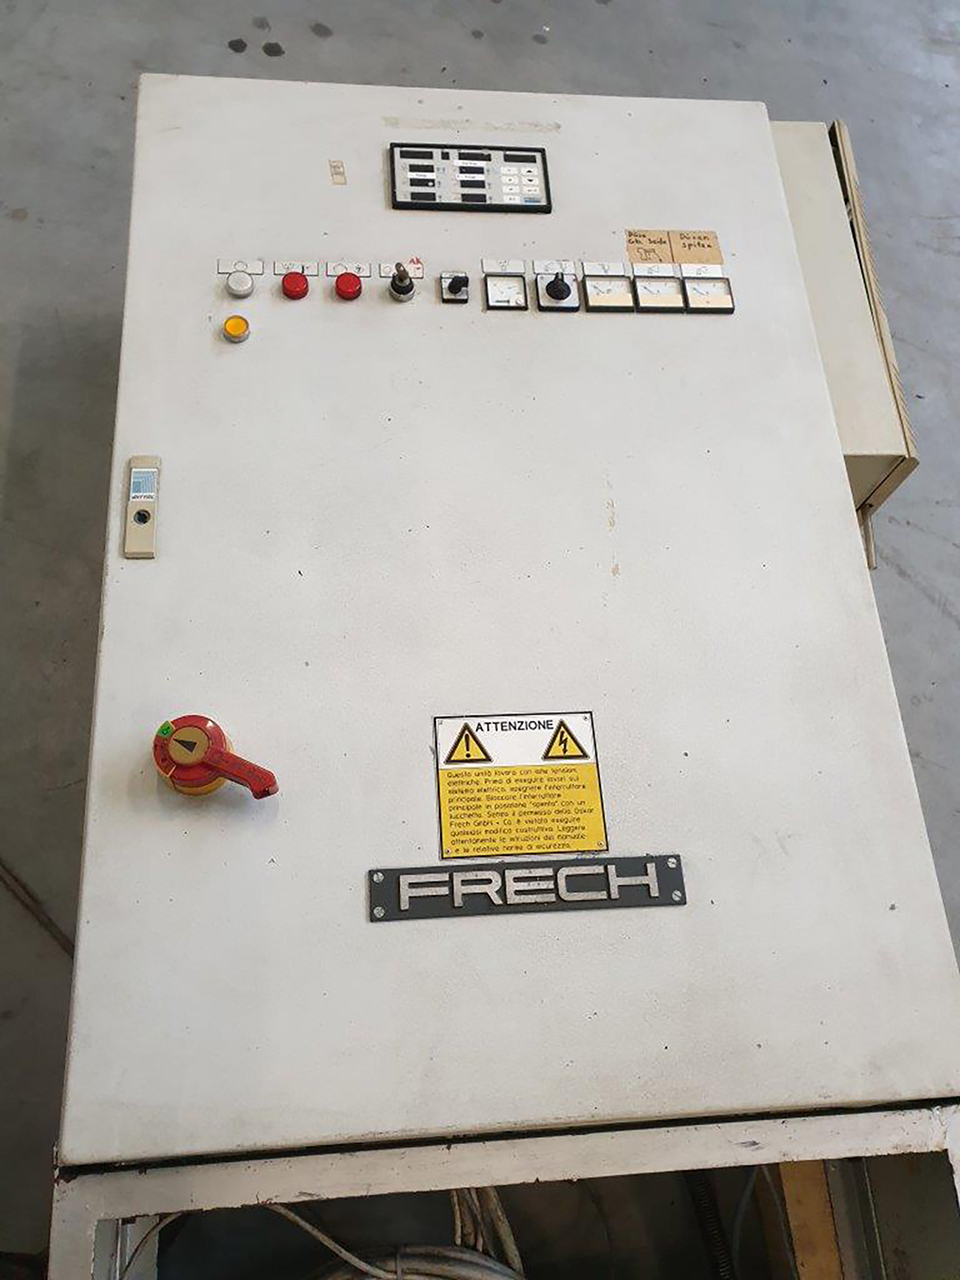 Rauch MOSZ 500/350 melting and holding furnace O1667, used